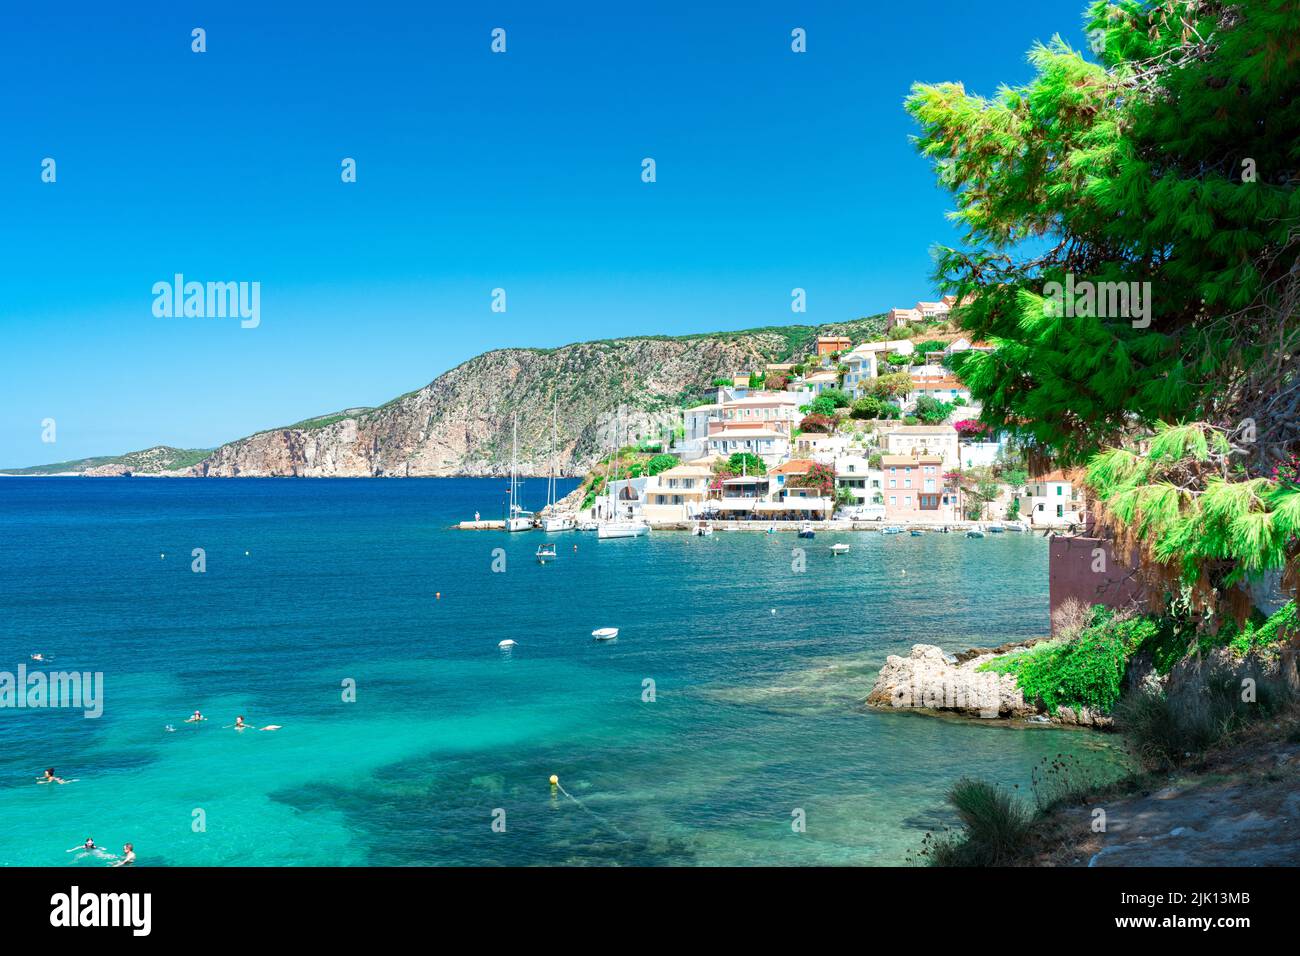 Small village and harbor of Assos overlooking the turquoise blue sea, Kefalonia, Ionian Islands, Greek Islands, Greece, Europe Stock Photo